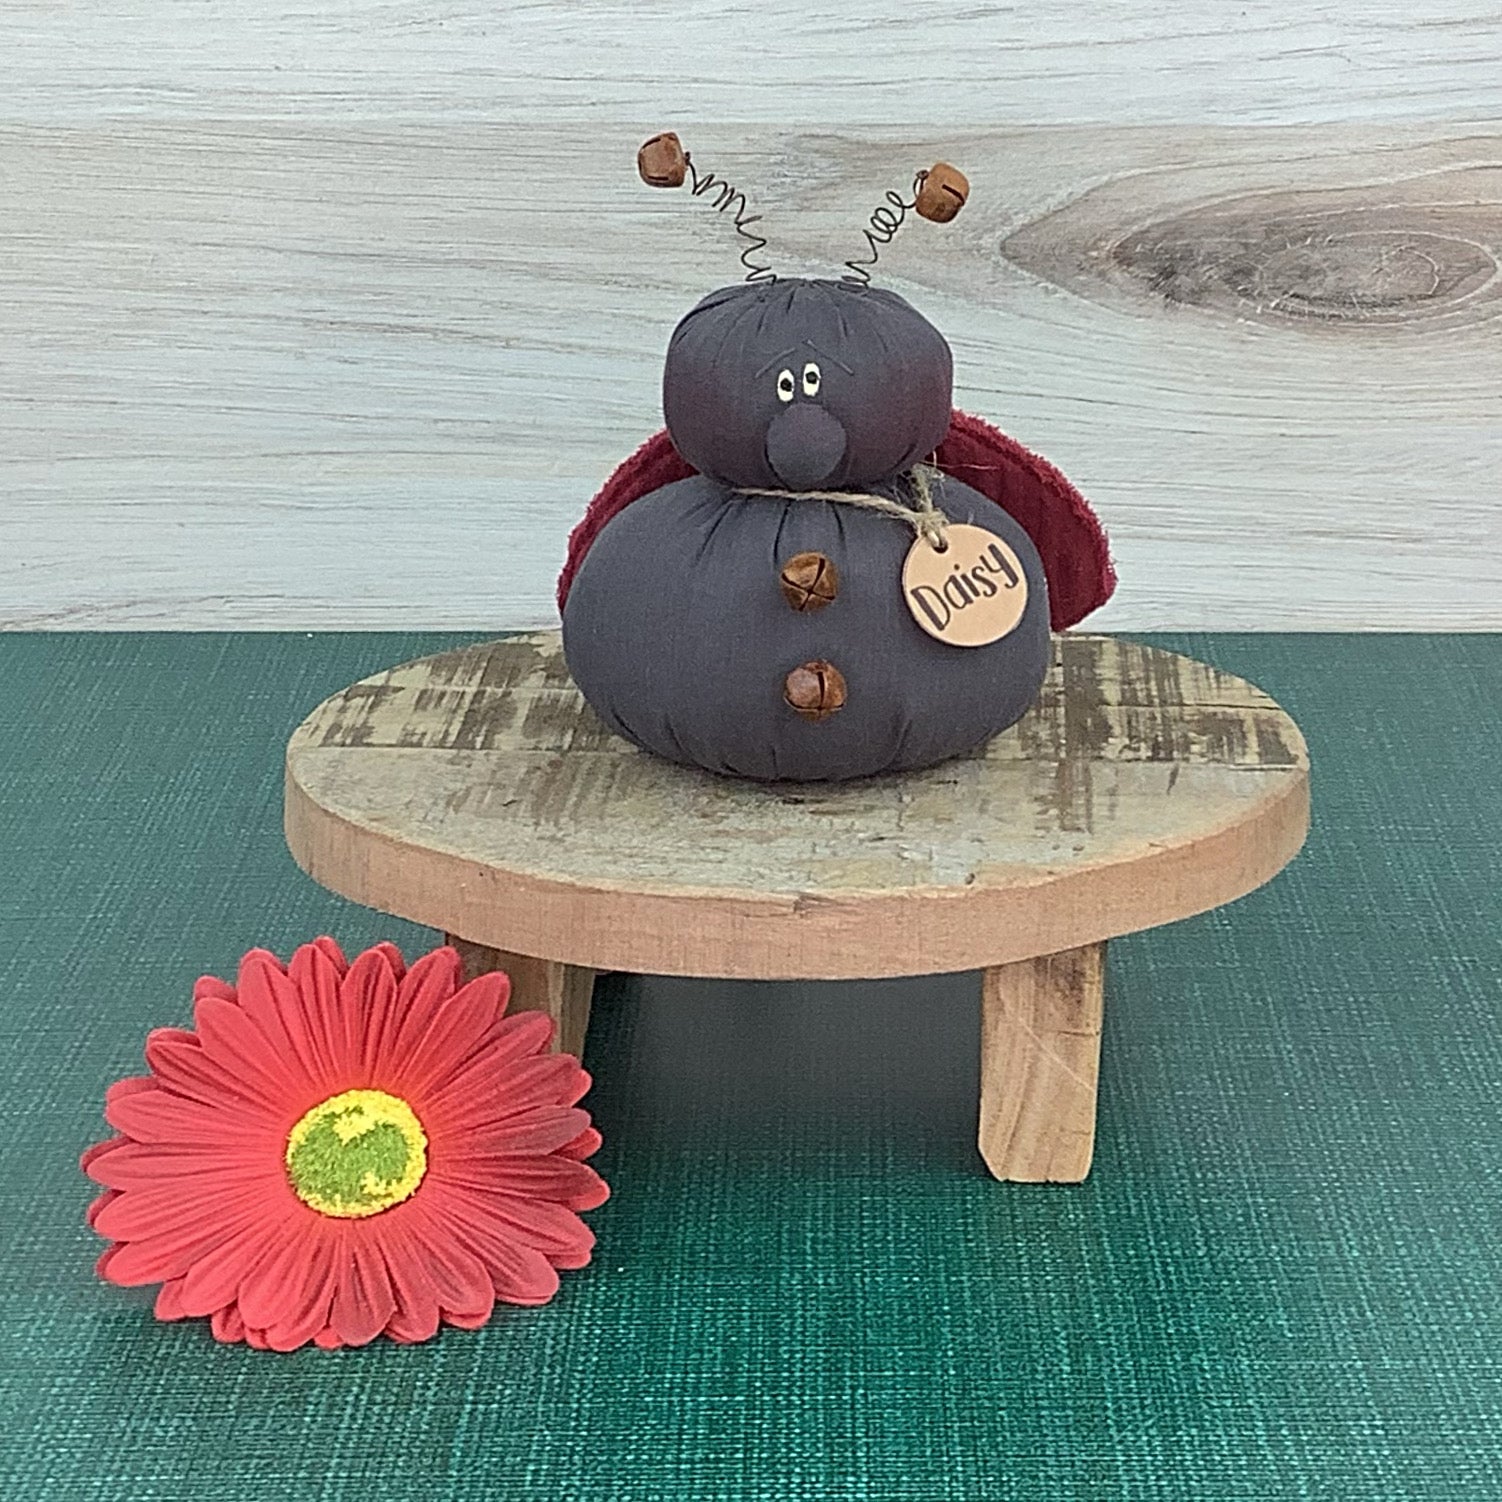 Daisy the Baby Ladybug - Handmade Whimsical Baby Ladybug Soft Sculpture Collectible Spring & Summer Décor by Honey and Me, Inc™